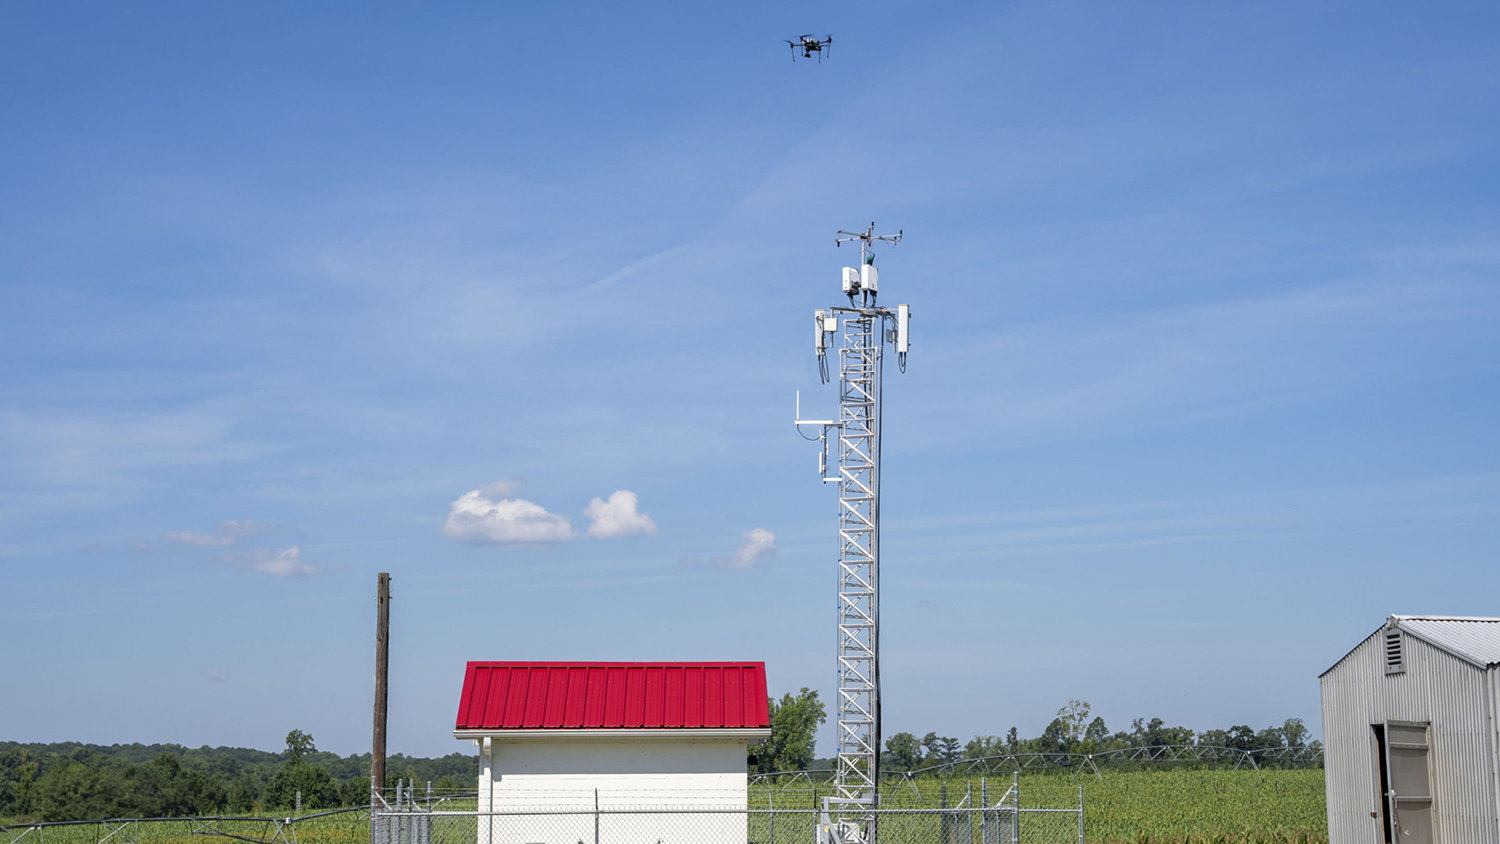 Small black drone hovers over field and small white building with red roof.